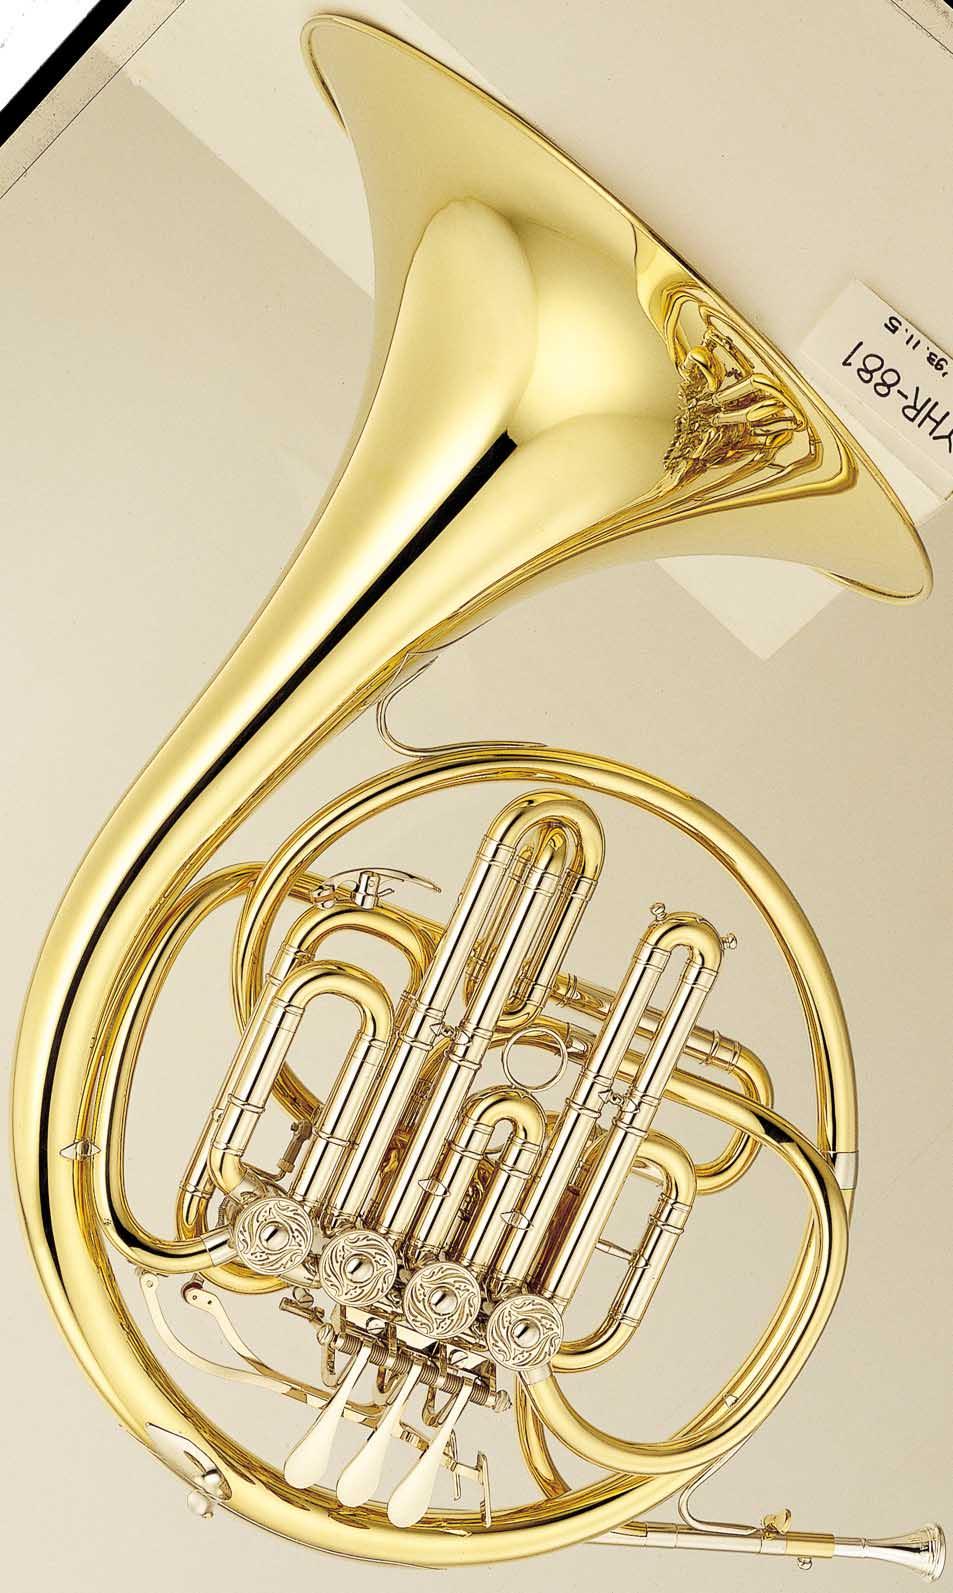 Double Descant Horns YHR-881 YHR-882 The Custom 881/882 provide the note security and tonal clarity of a descant horn, yet are capable of producing the big warm sound of an